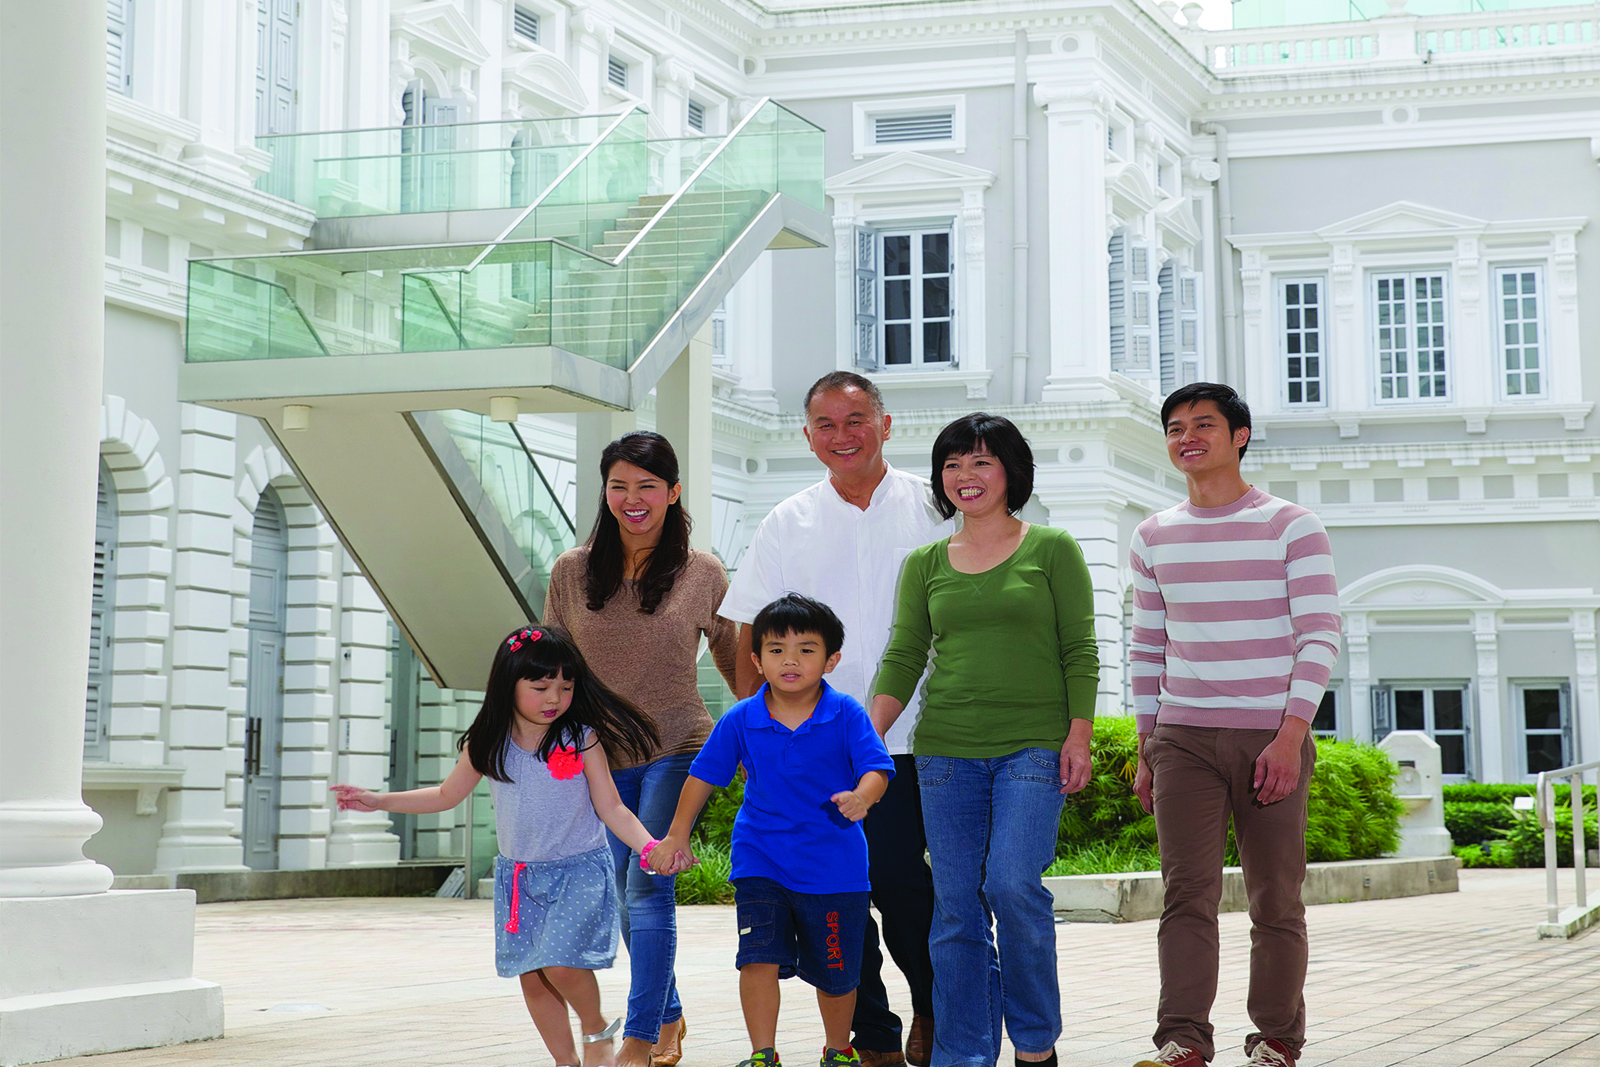 Download Celebrating Grandparents Day With Families For Life At The National Museum